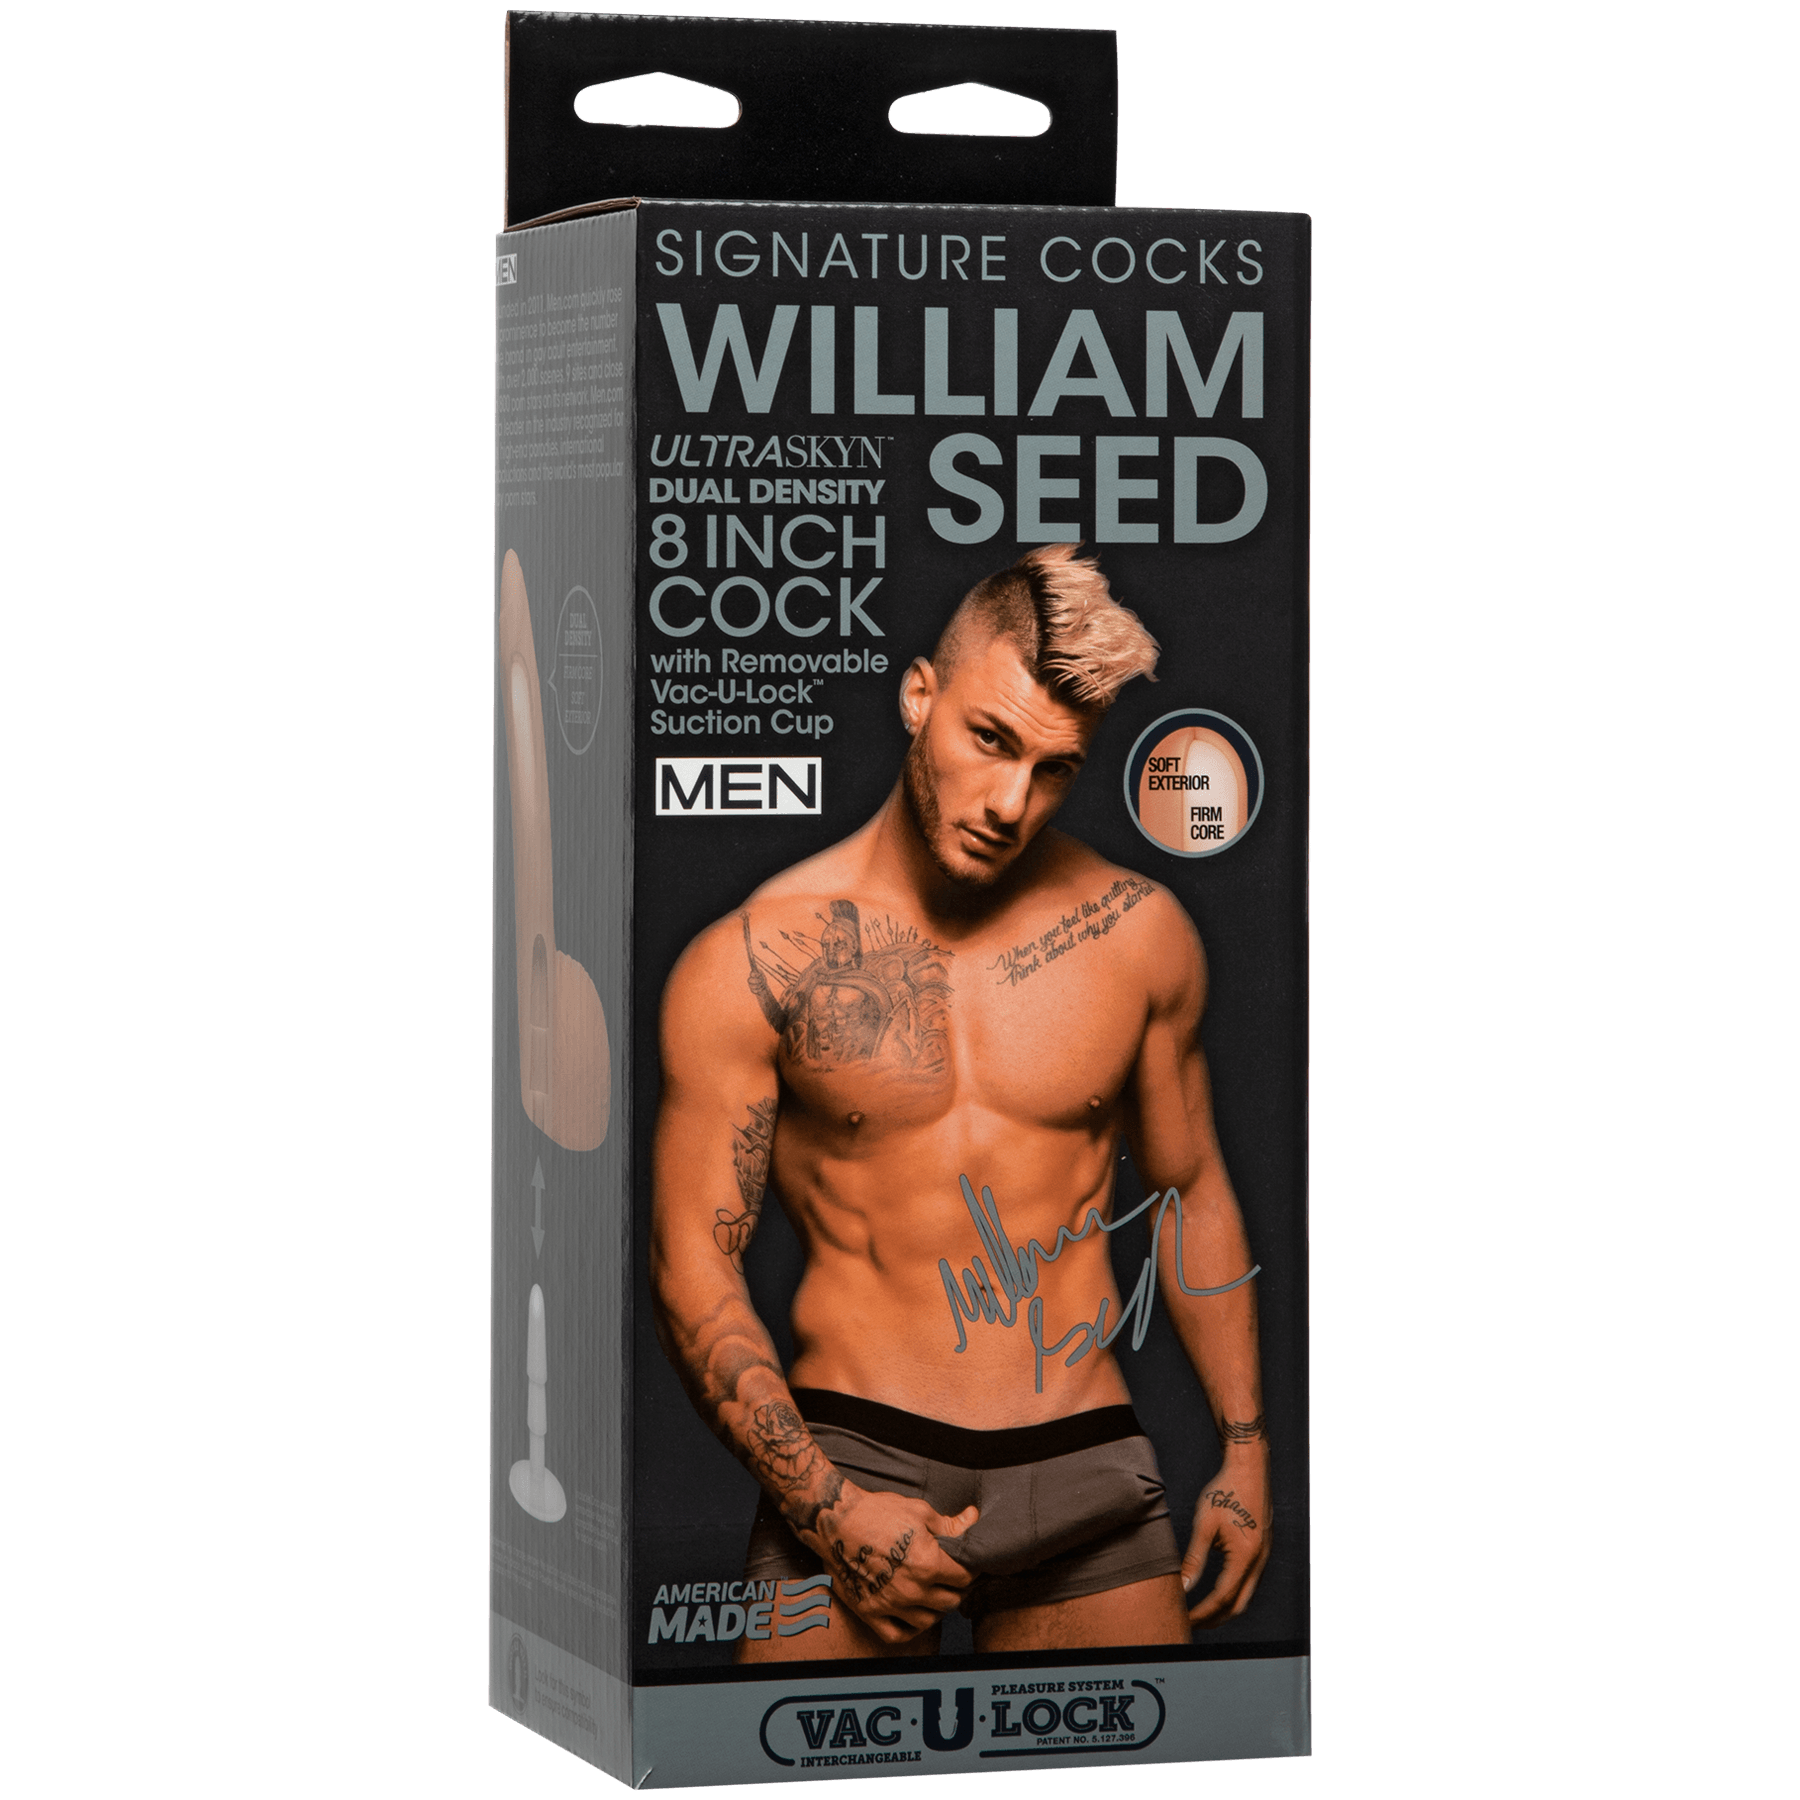 Doc Johnson Signature Cock William Seed Ultraskyn 8in Cock - Buy At Luxury Toy X - Free 3-Day Shipping